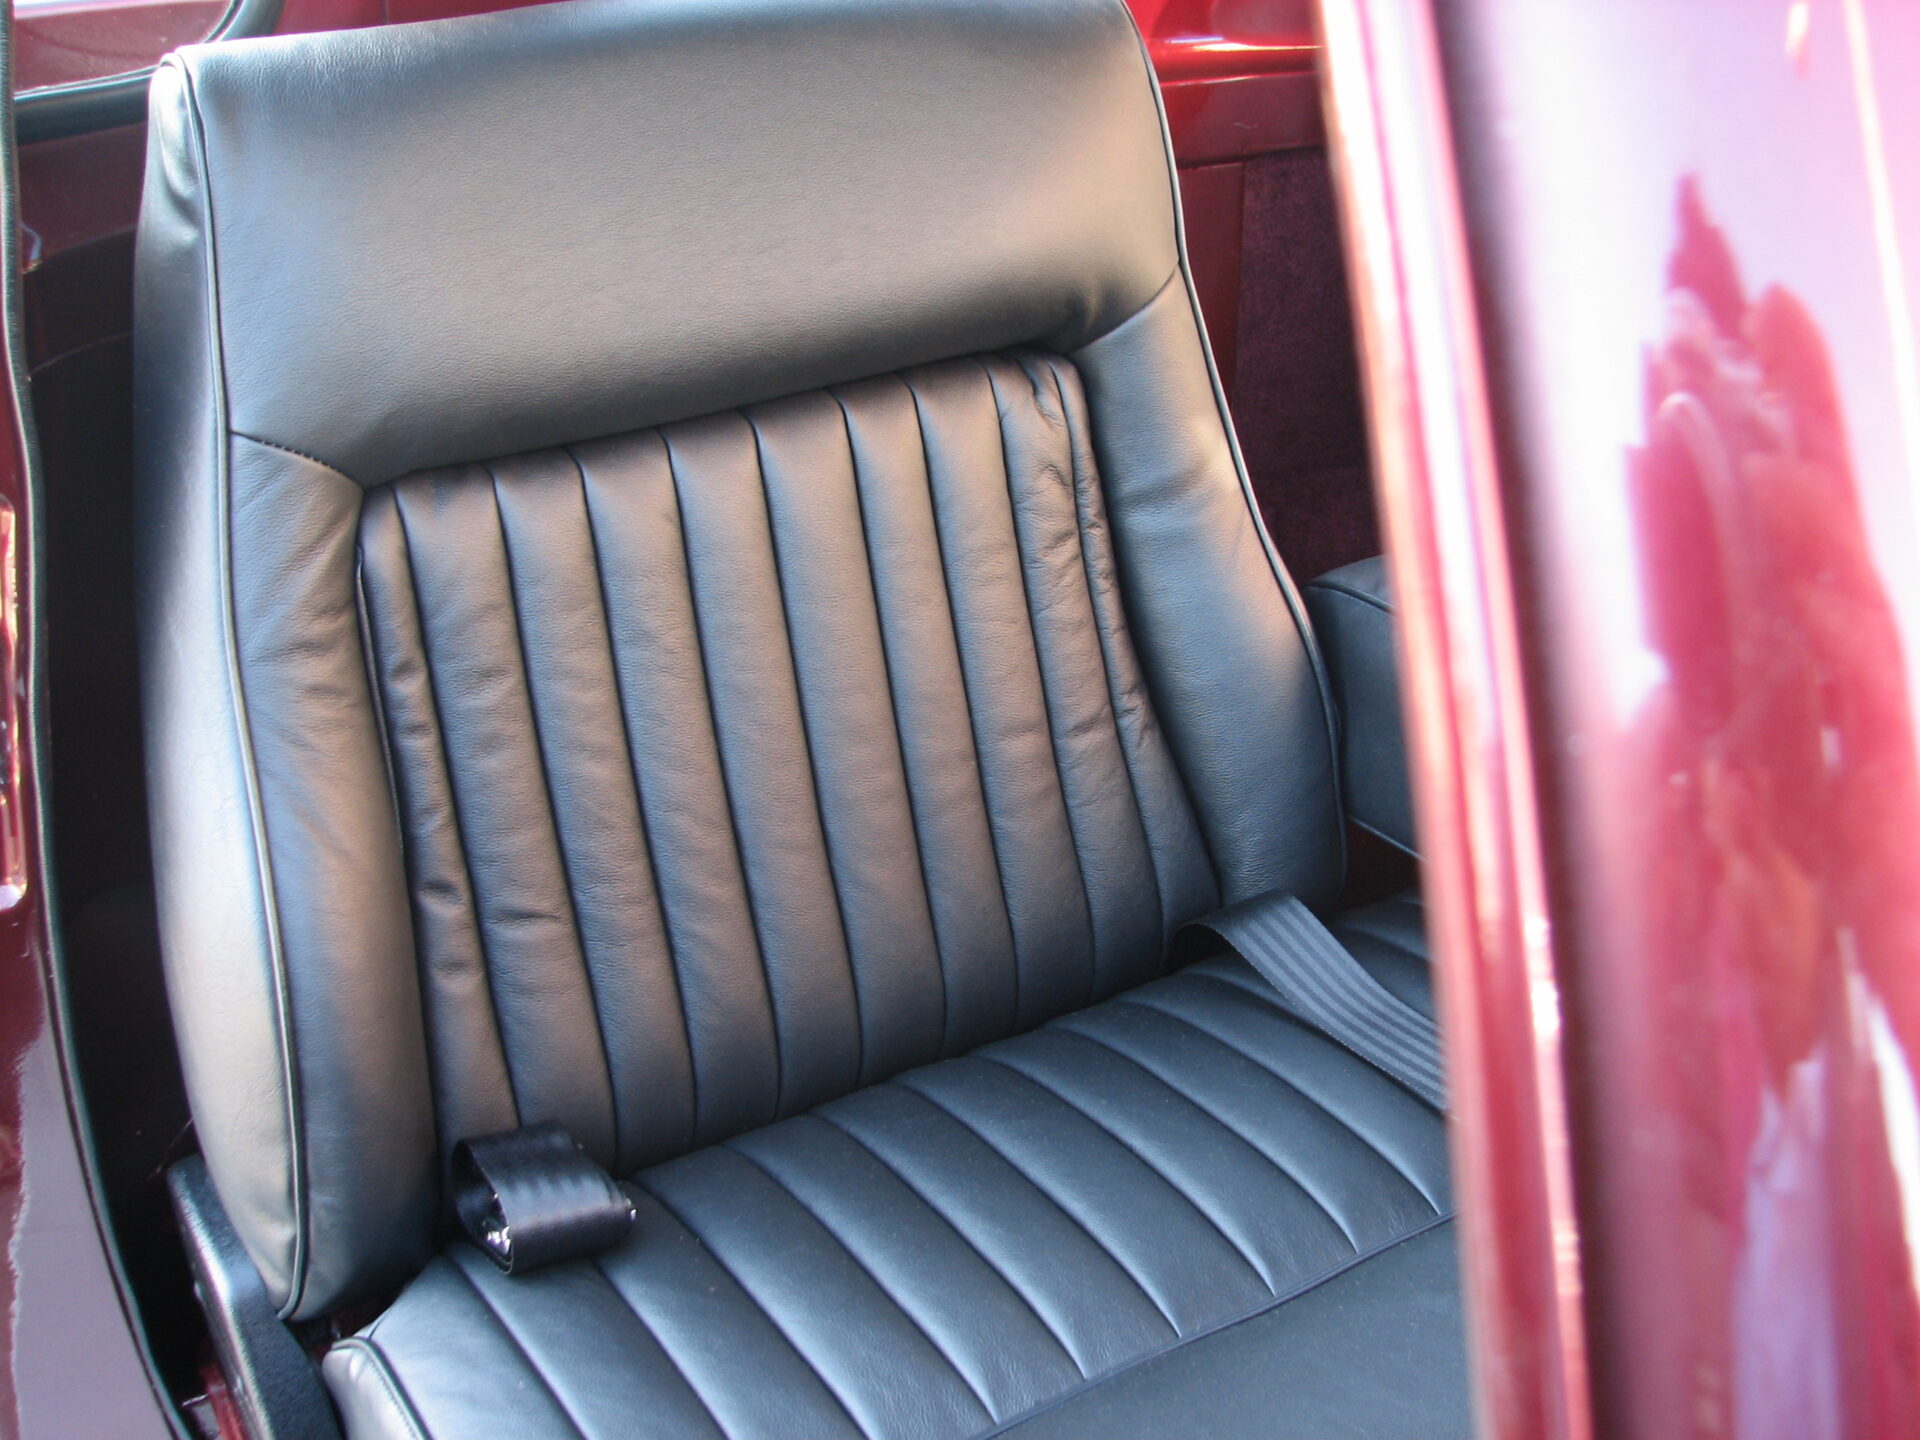 Replacement Car Seat Foam for Classic Cars – Legendary Auto Interiors